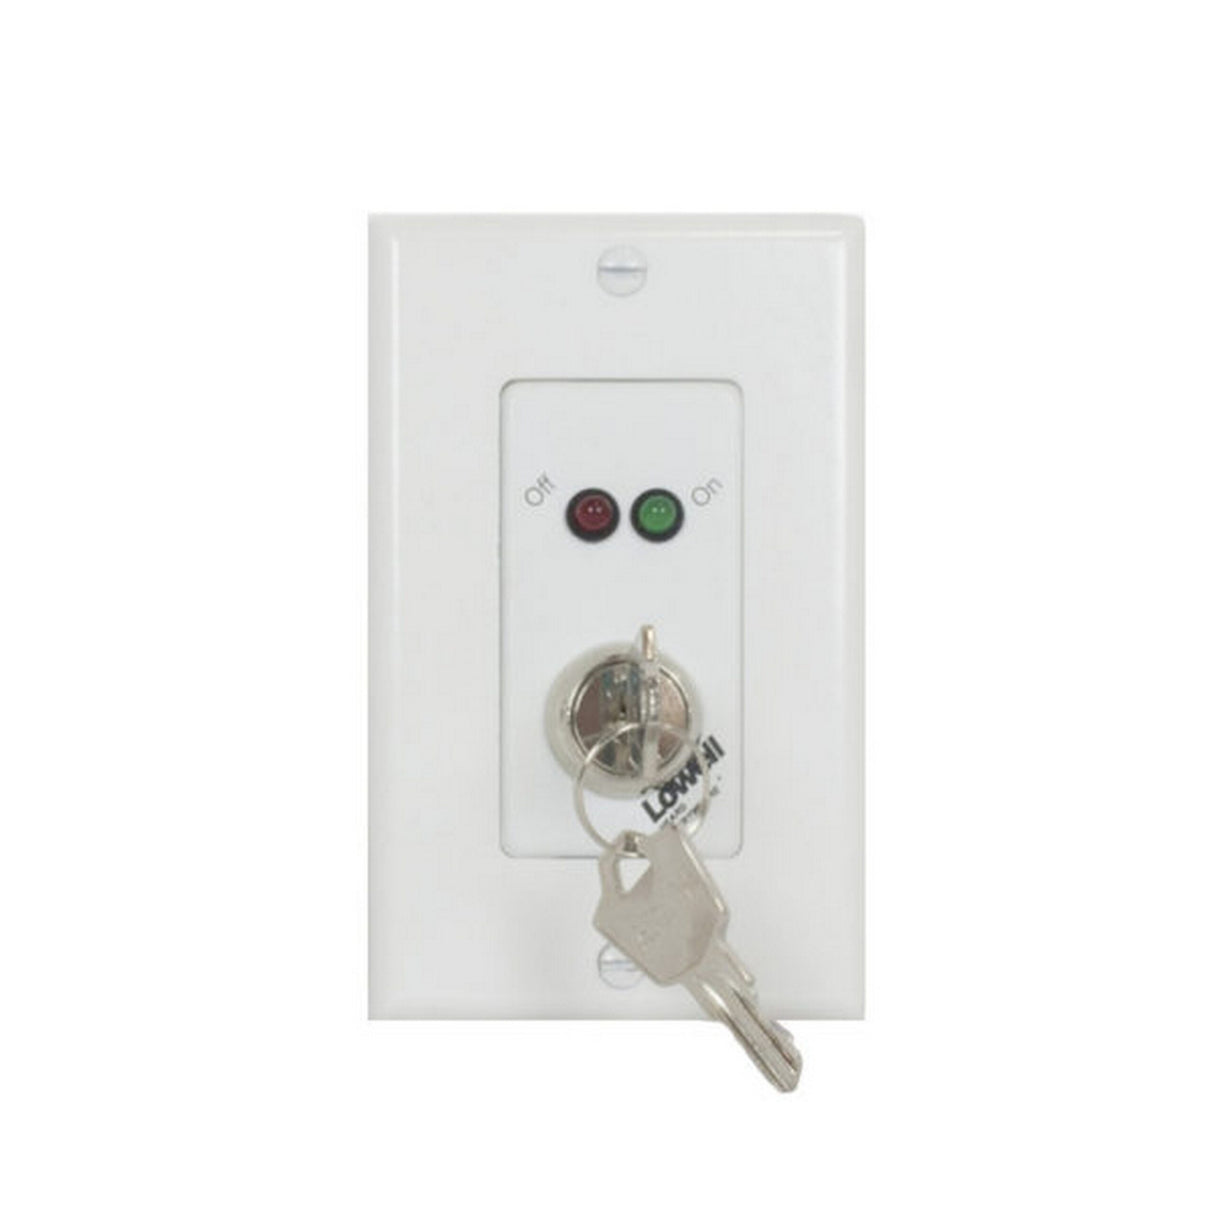 Lowell RPSW2-MKP Momentary SPST Low-Voltage Switch